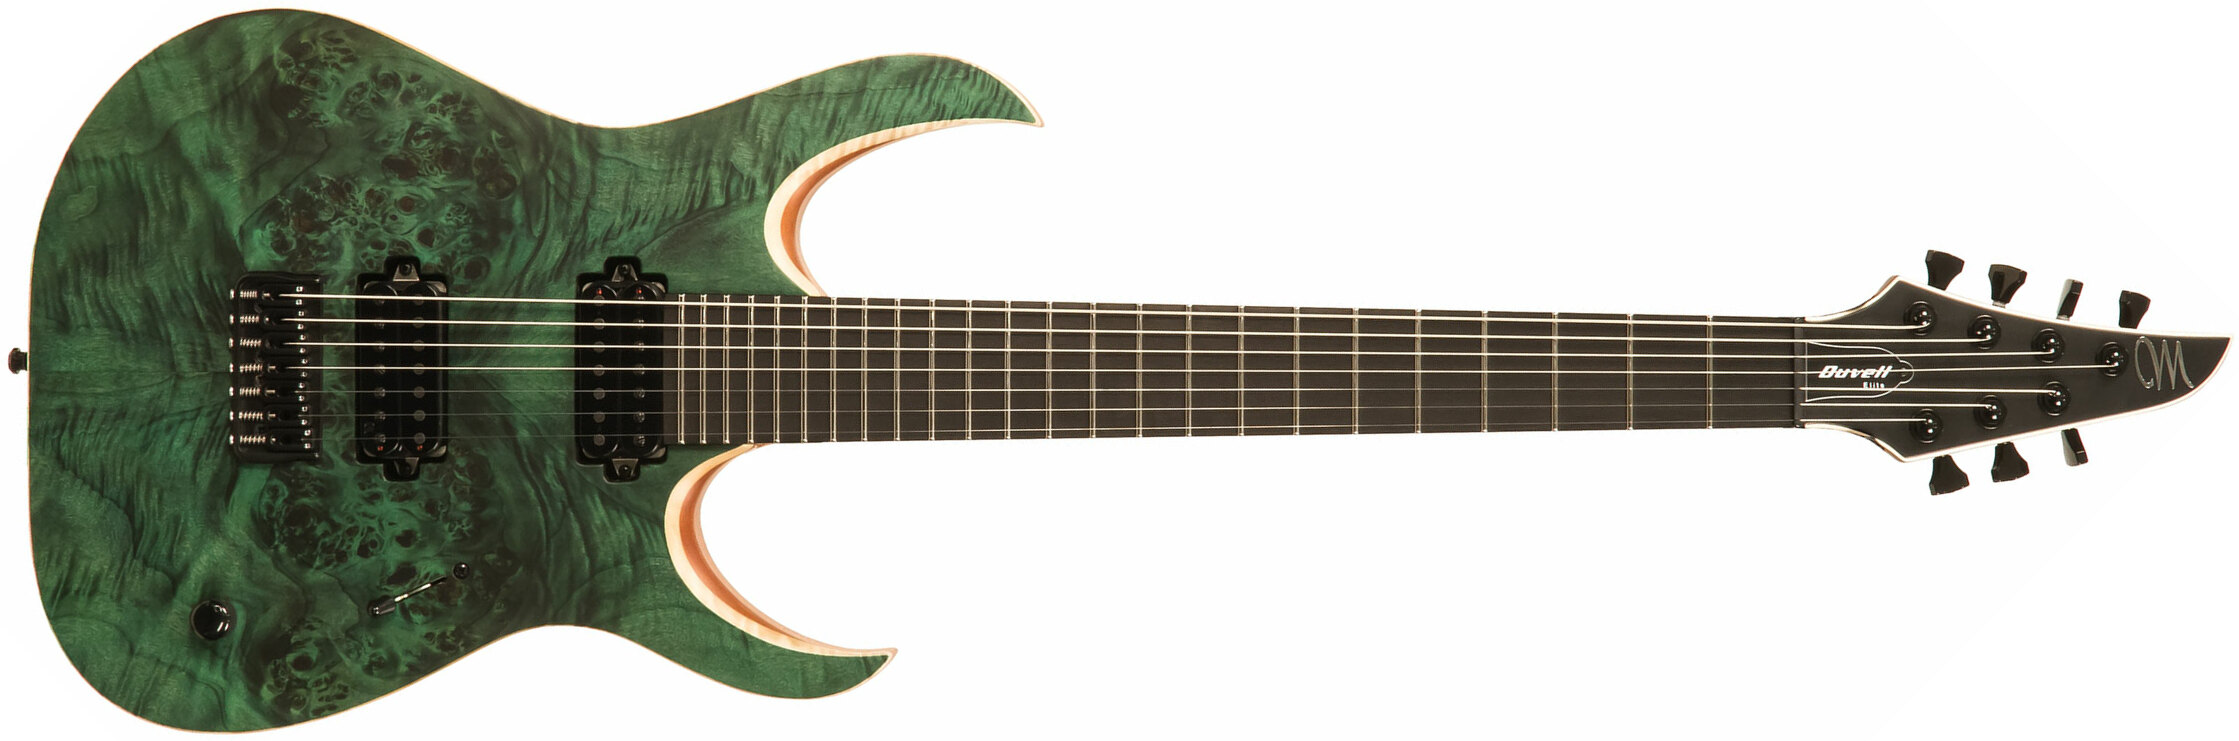 Mayones Guitars Duvell Elite 7 Hh Tko Ht Eb - Dirty Green Satin - 7 string electric guitar - Main picture